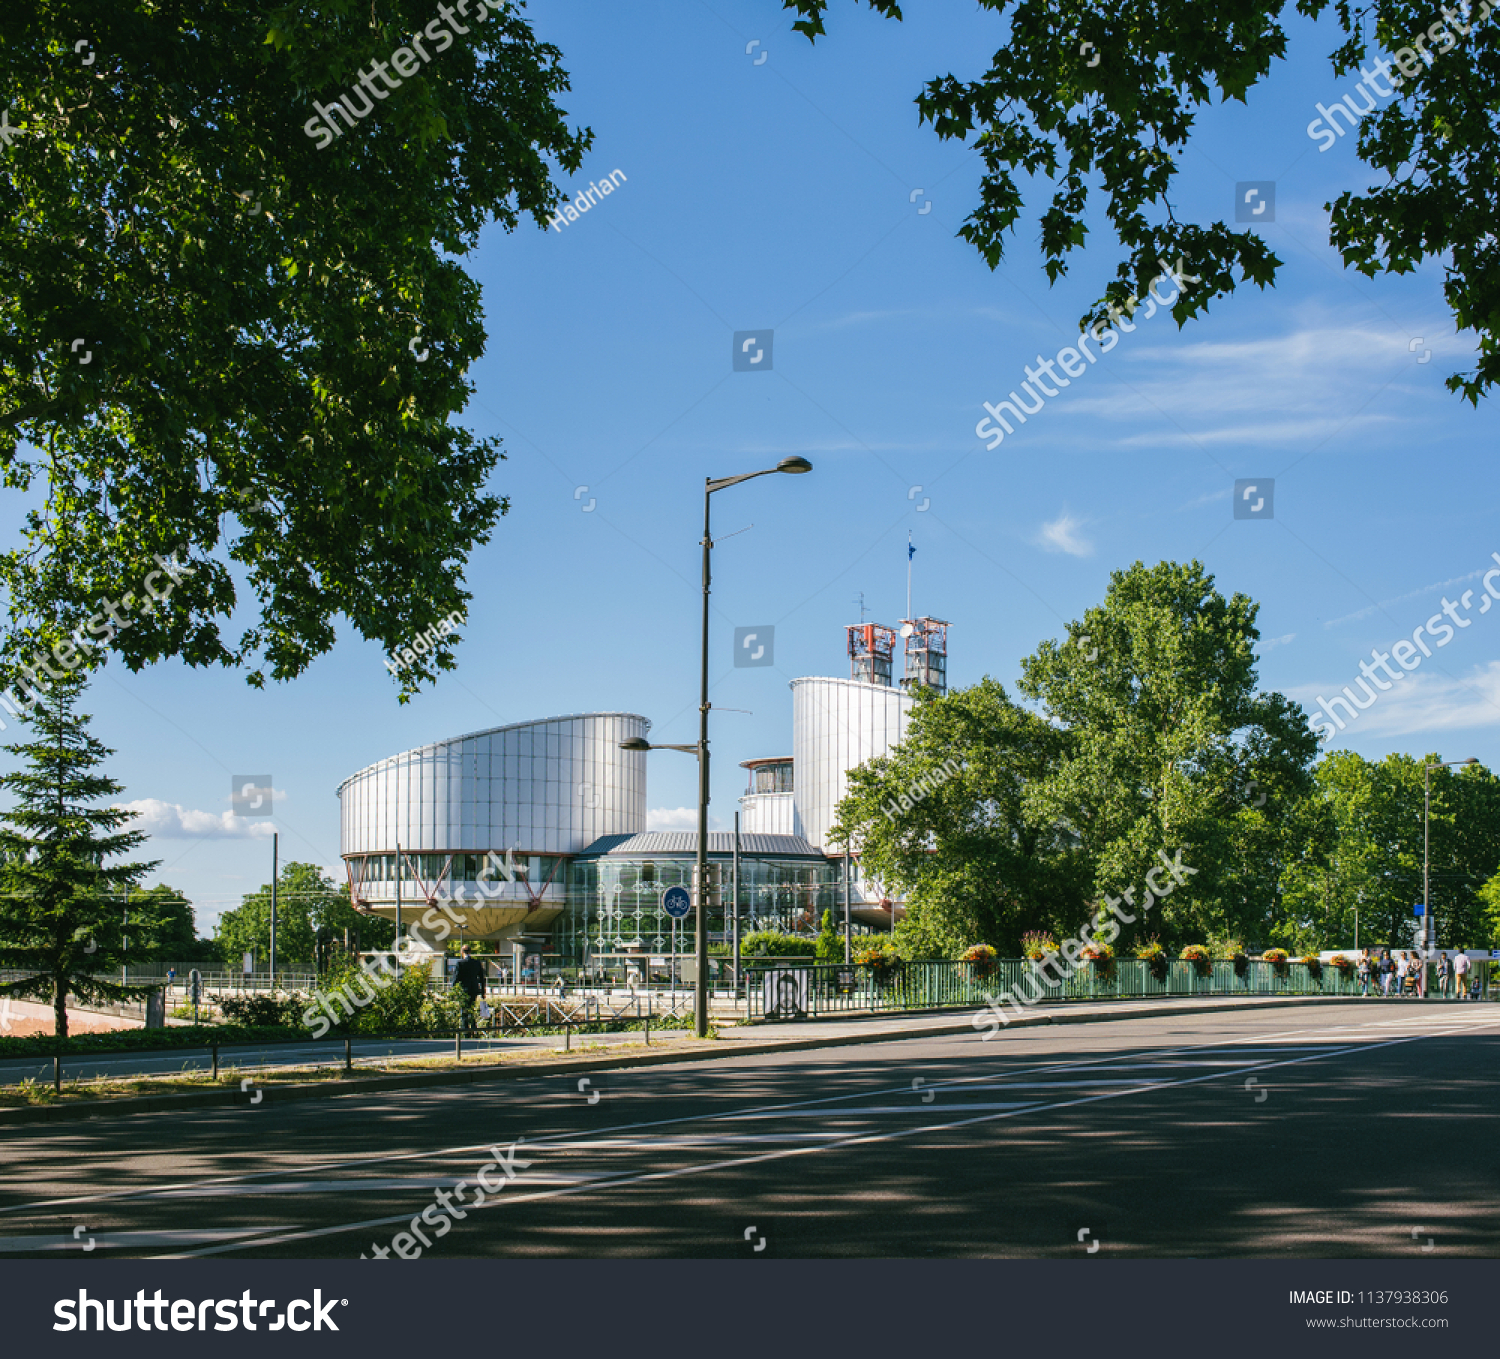 STRASBOURG, FRANCE - JUN 25, 2018: European Court of Human Rights building in the summer evening #1137938306